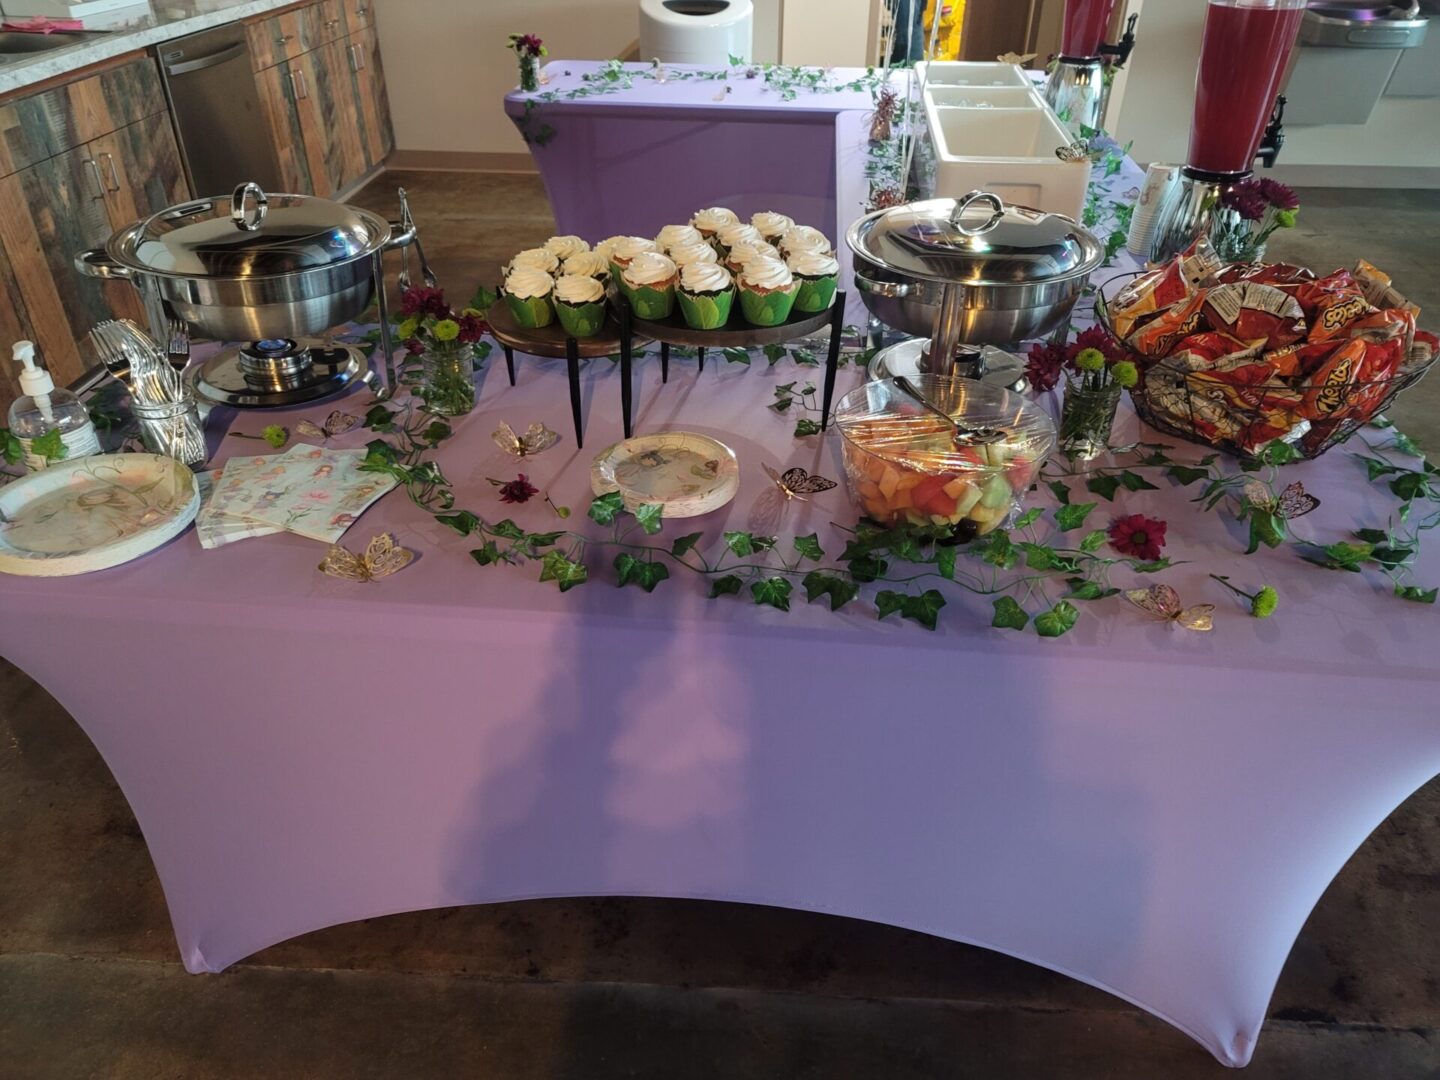 A table with cupcakes and other food on it.